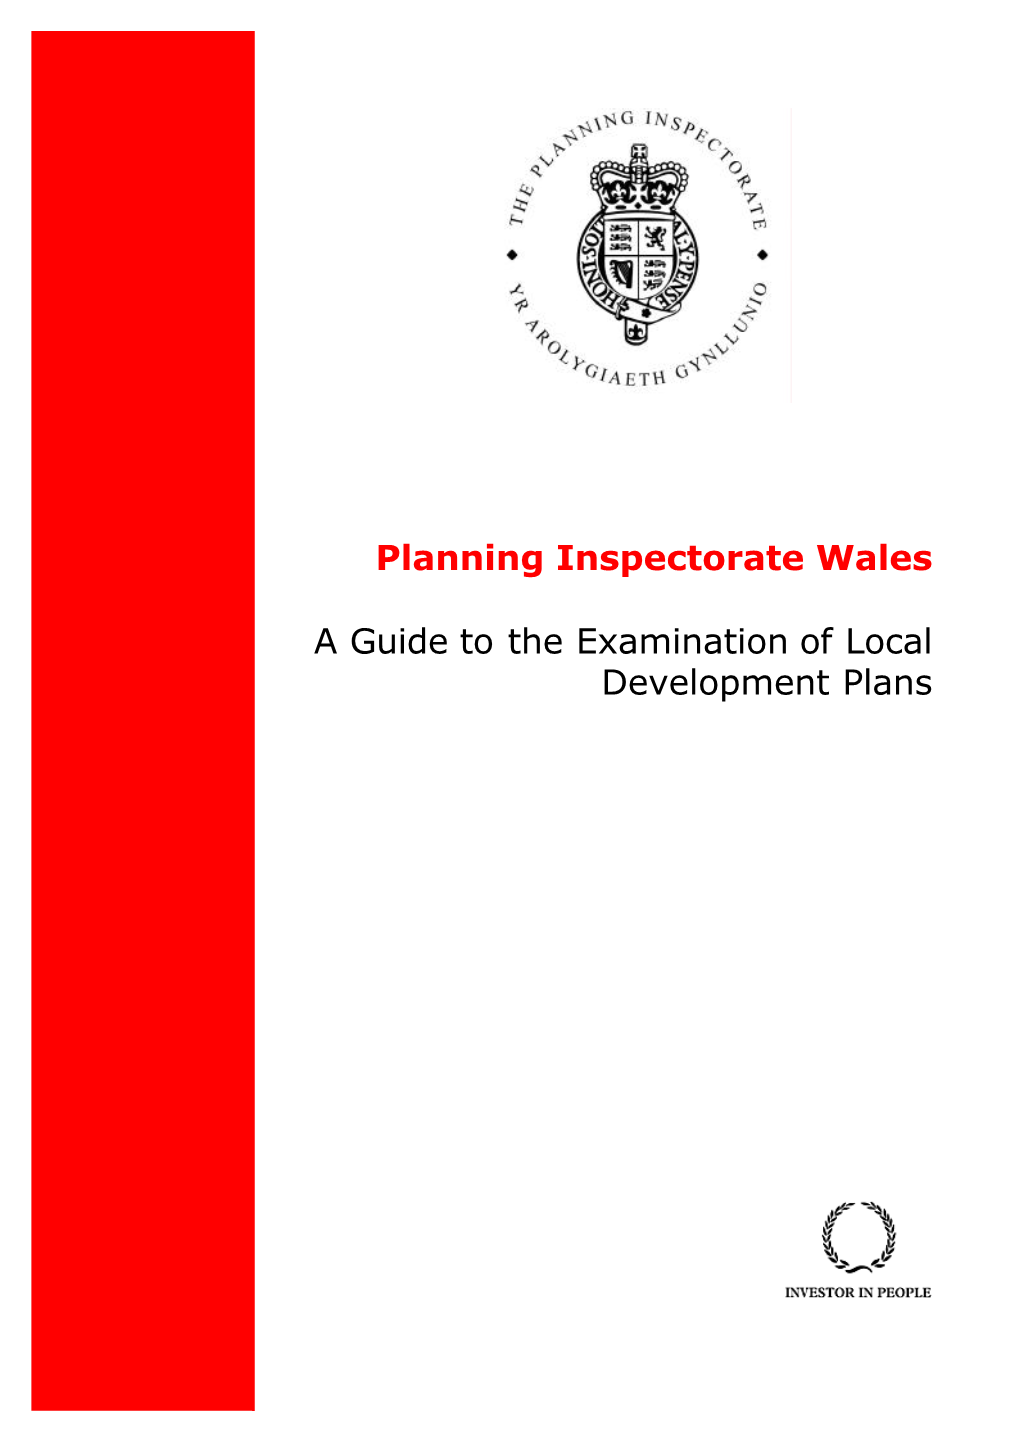 Planning Inspectorate Wales a Guide to the Examination of Local